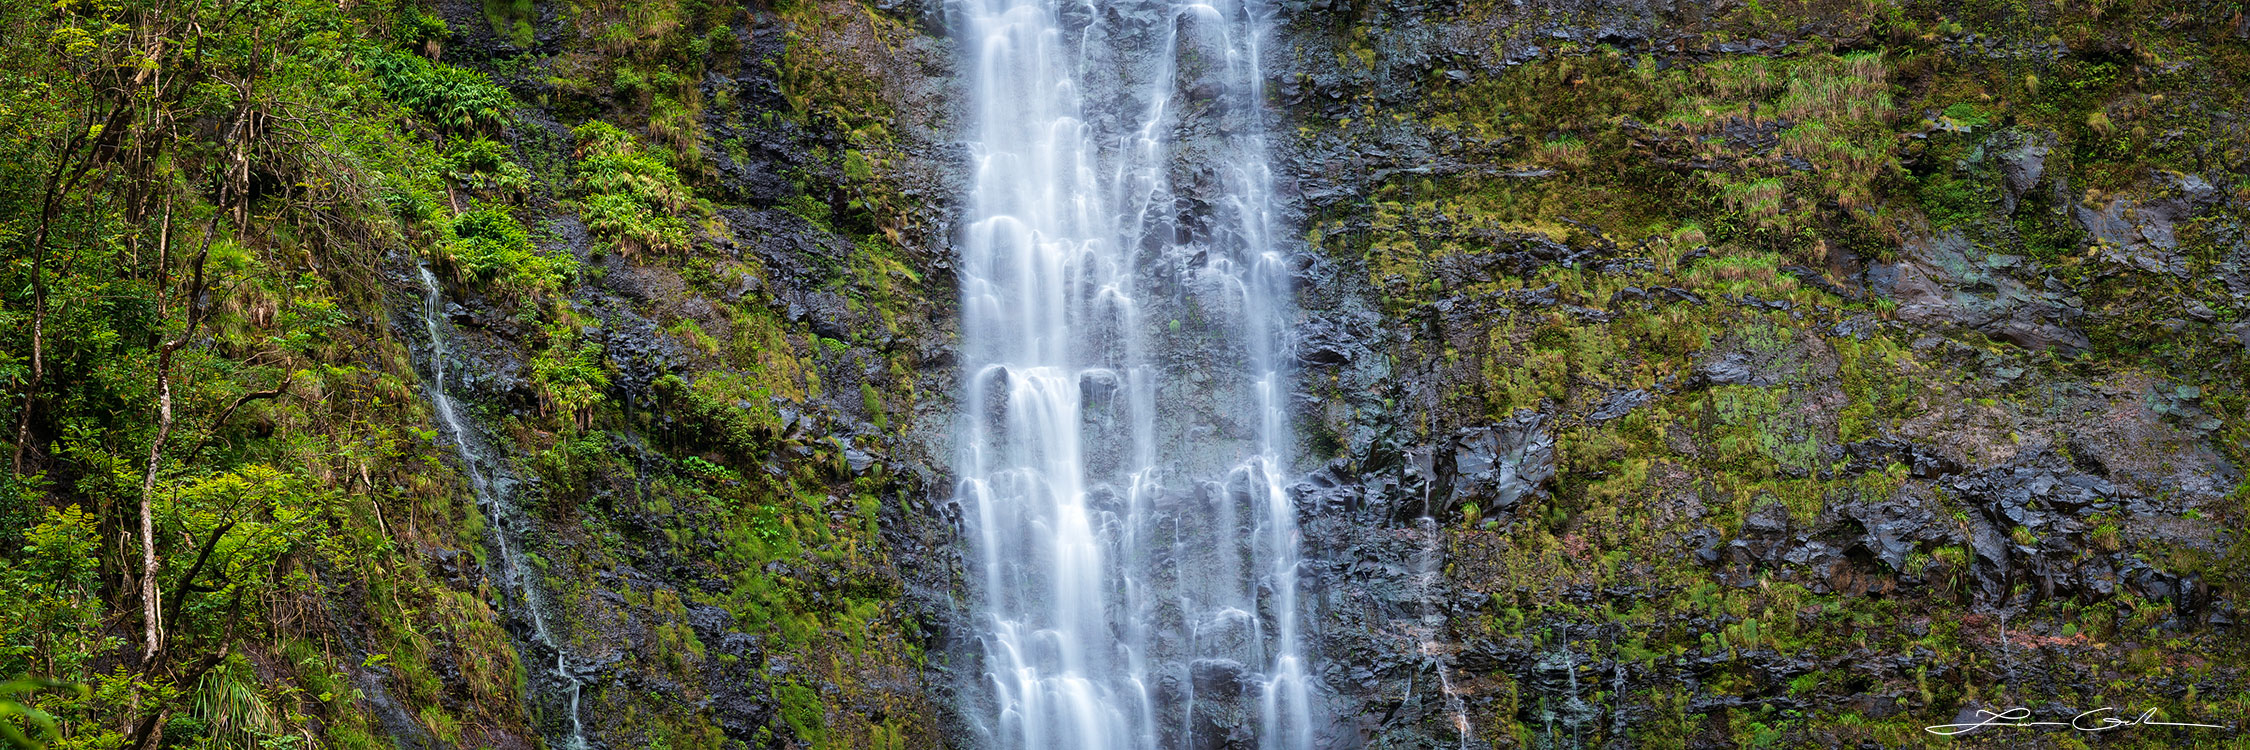 Pano of a tall, powerful waterfall cascading down a moss-covered cliff with resilient trees on the far left in Maui, Hawaii - Gintchin Fine Art.